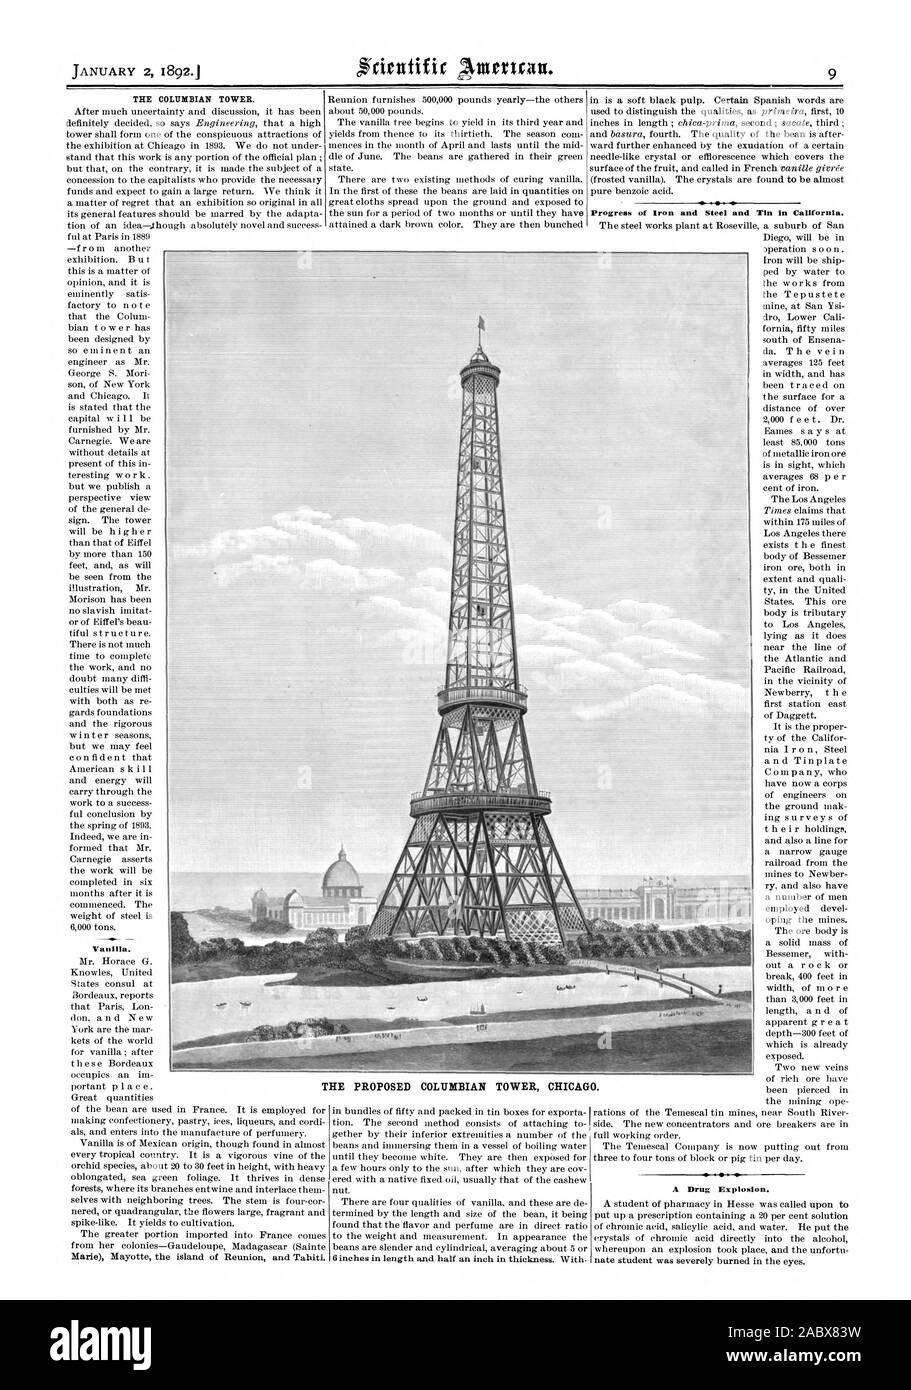 THE COLUMBIAN TOWER. Vanilla. Progress of Iron and Steel and Tin in California. A Drug Explosion. NI 1' 9 HE PROPOSED COLUMBIAN TOWER CHICAGO., scientific american, 1892-01-02 Stock Photo